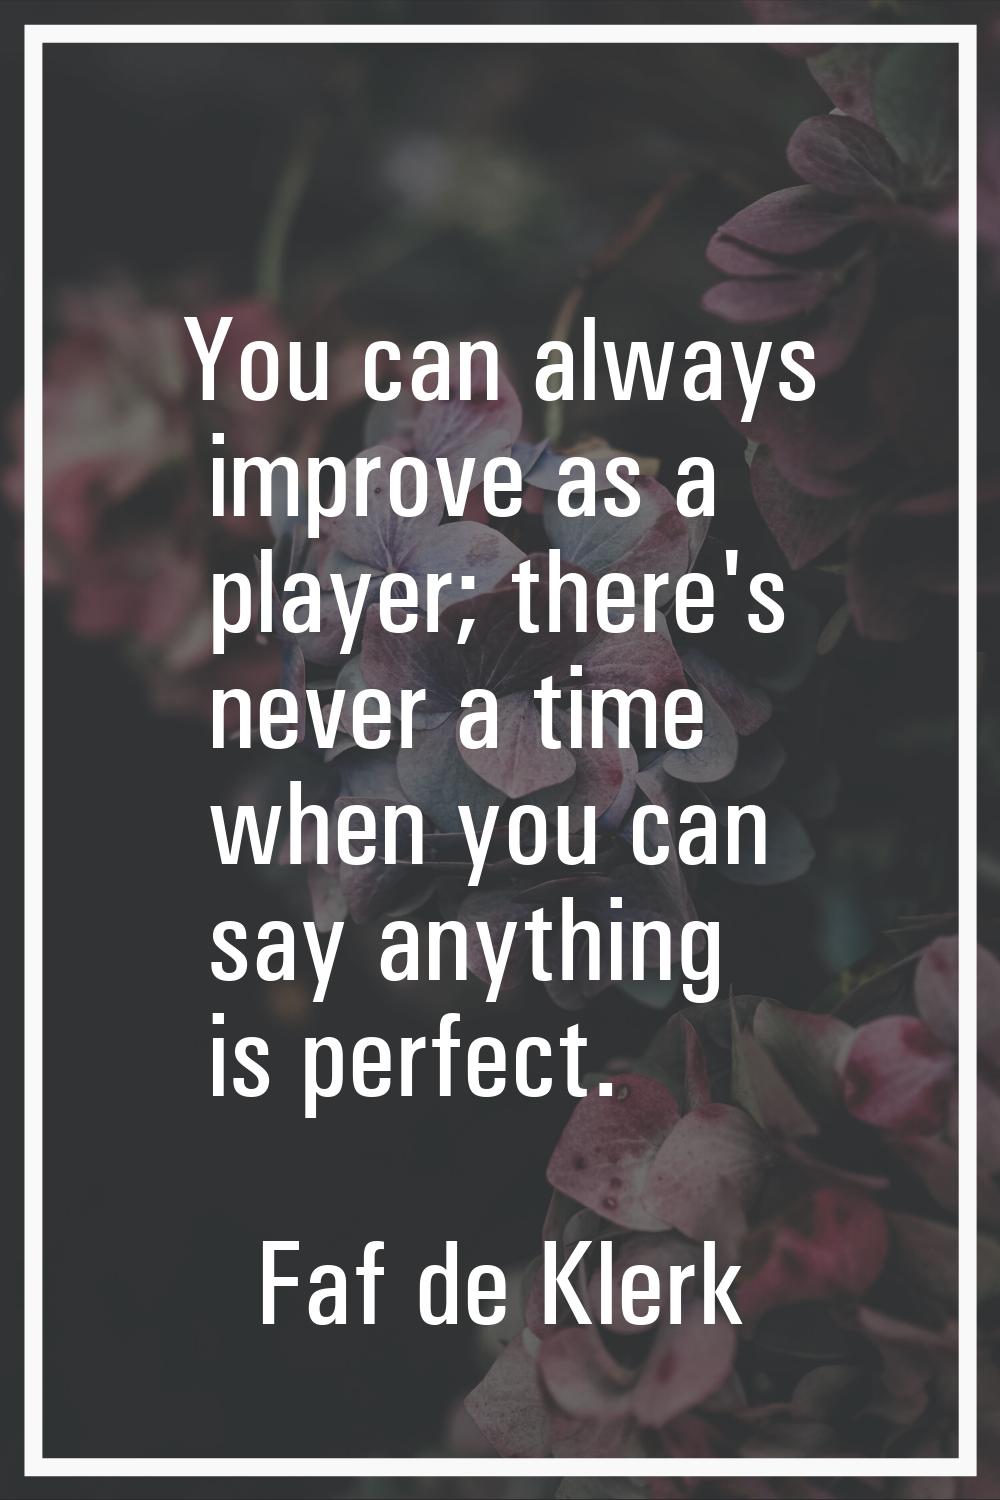 You can always improve as a player; there's never a time when you can say anything is perfect.